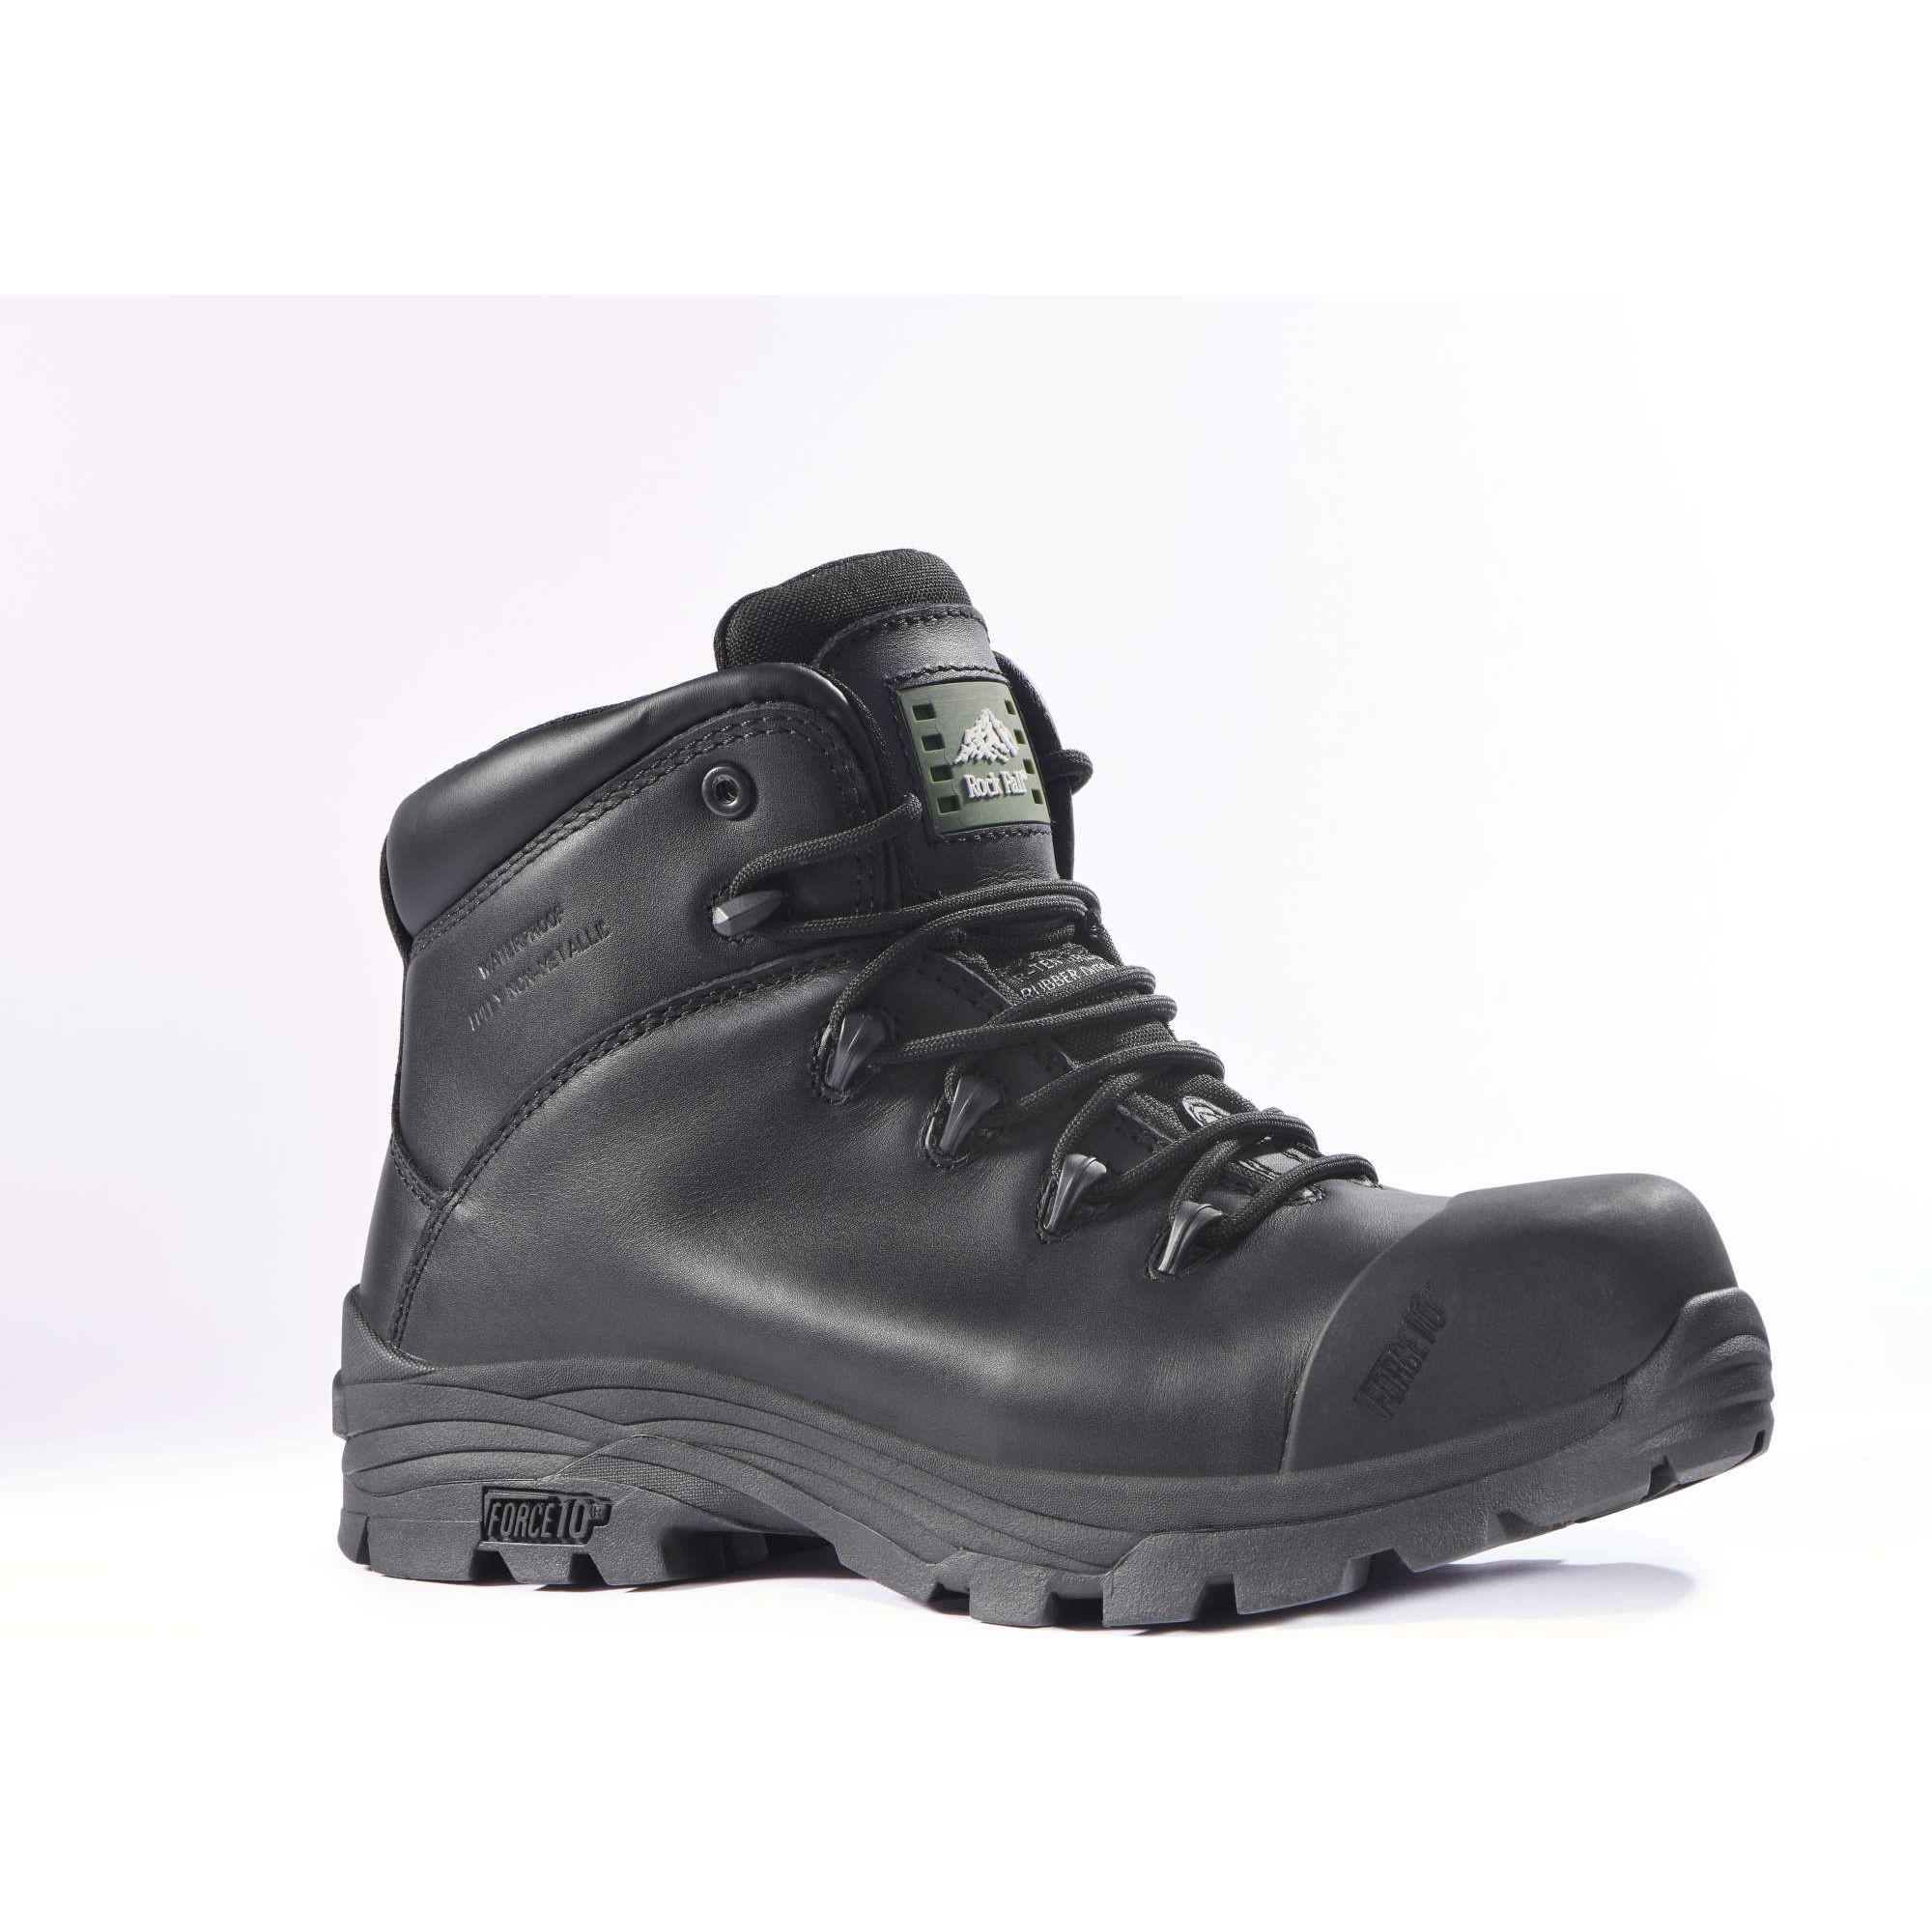 Rock Fall Denver S3 Waterproof Safety Boots